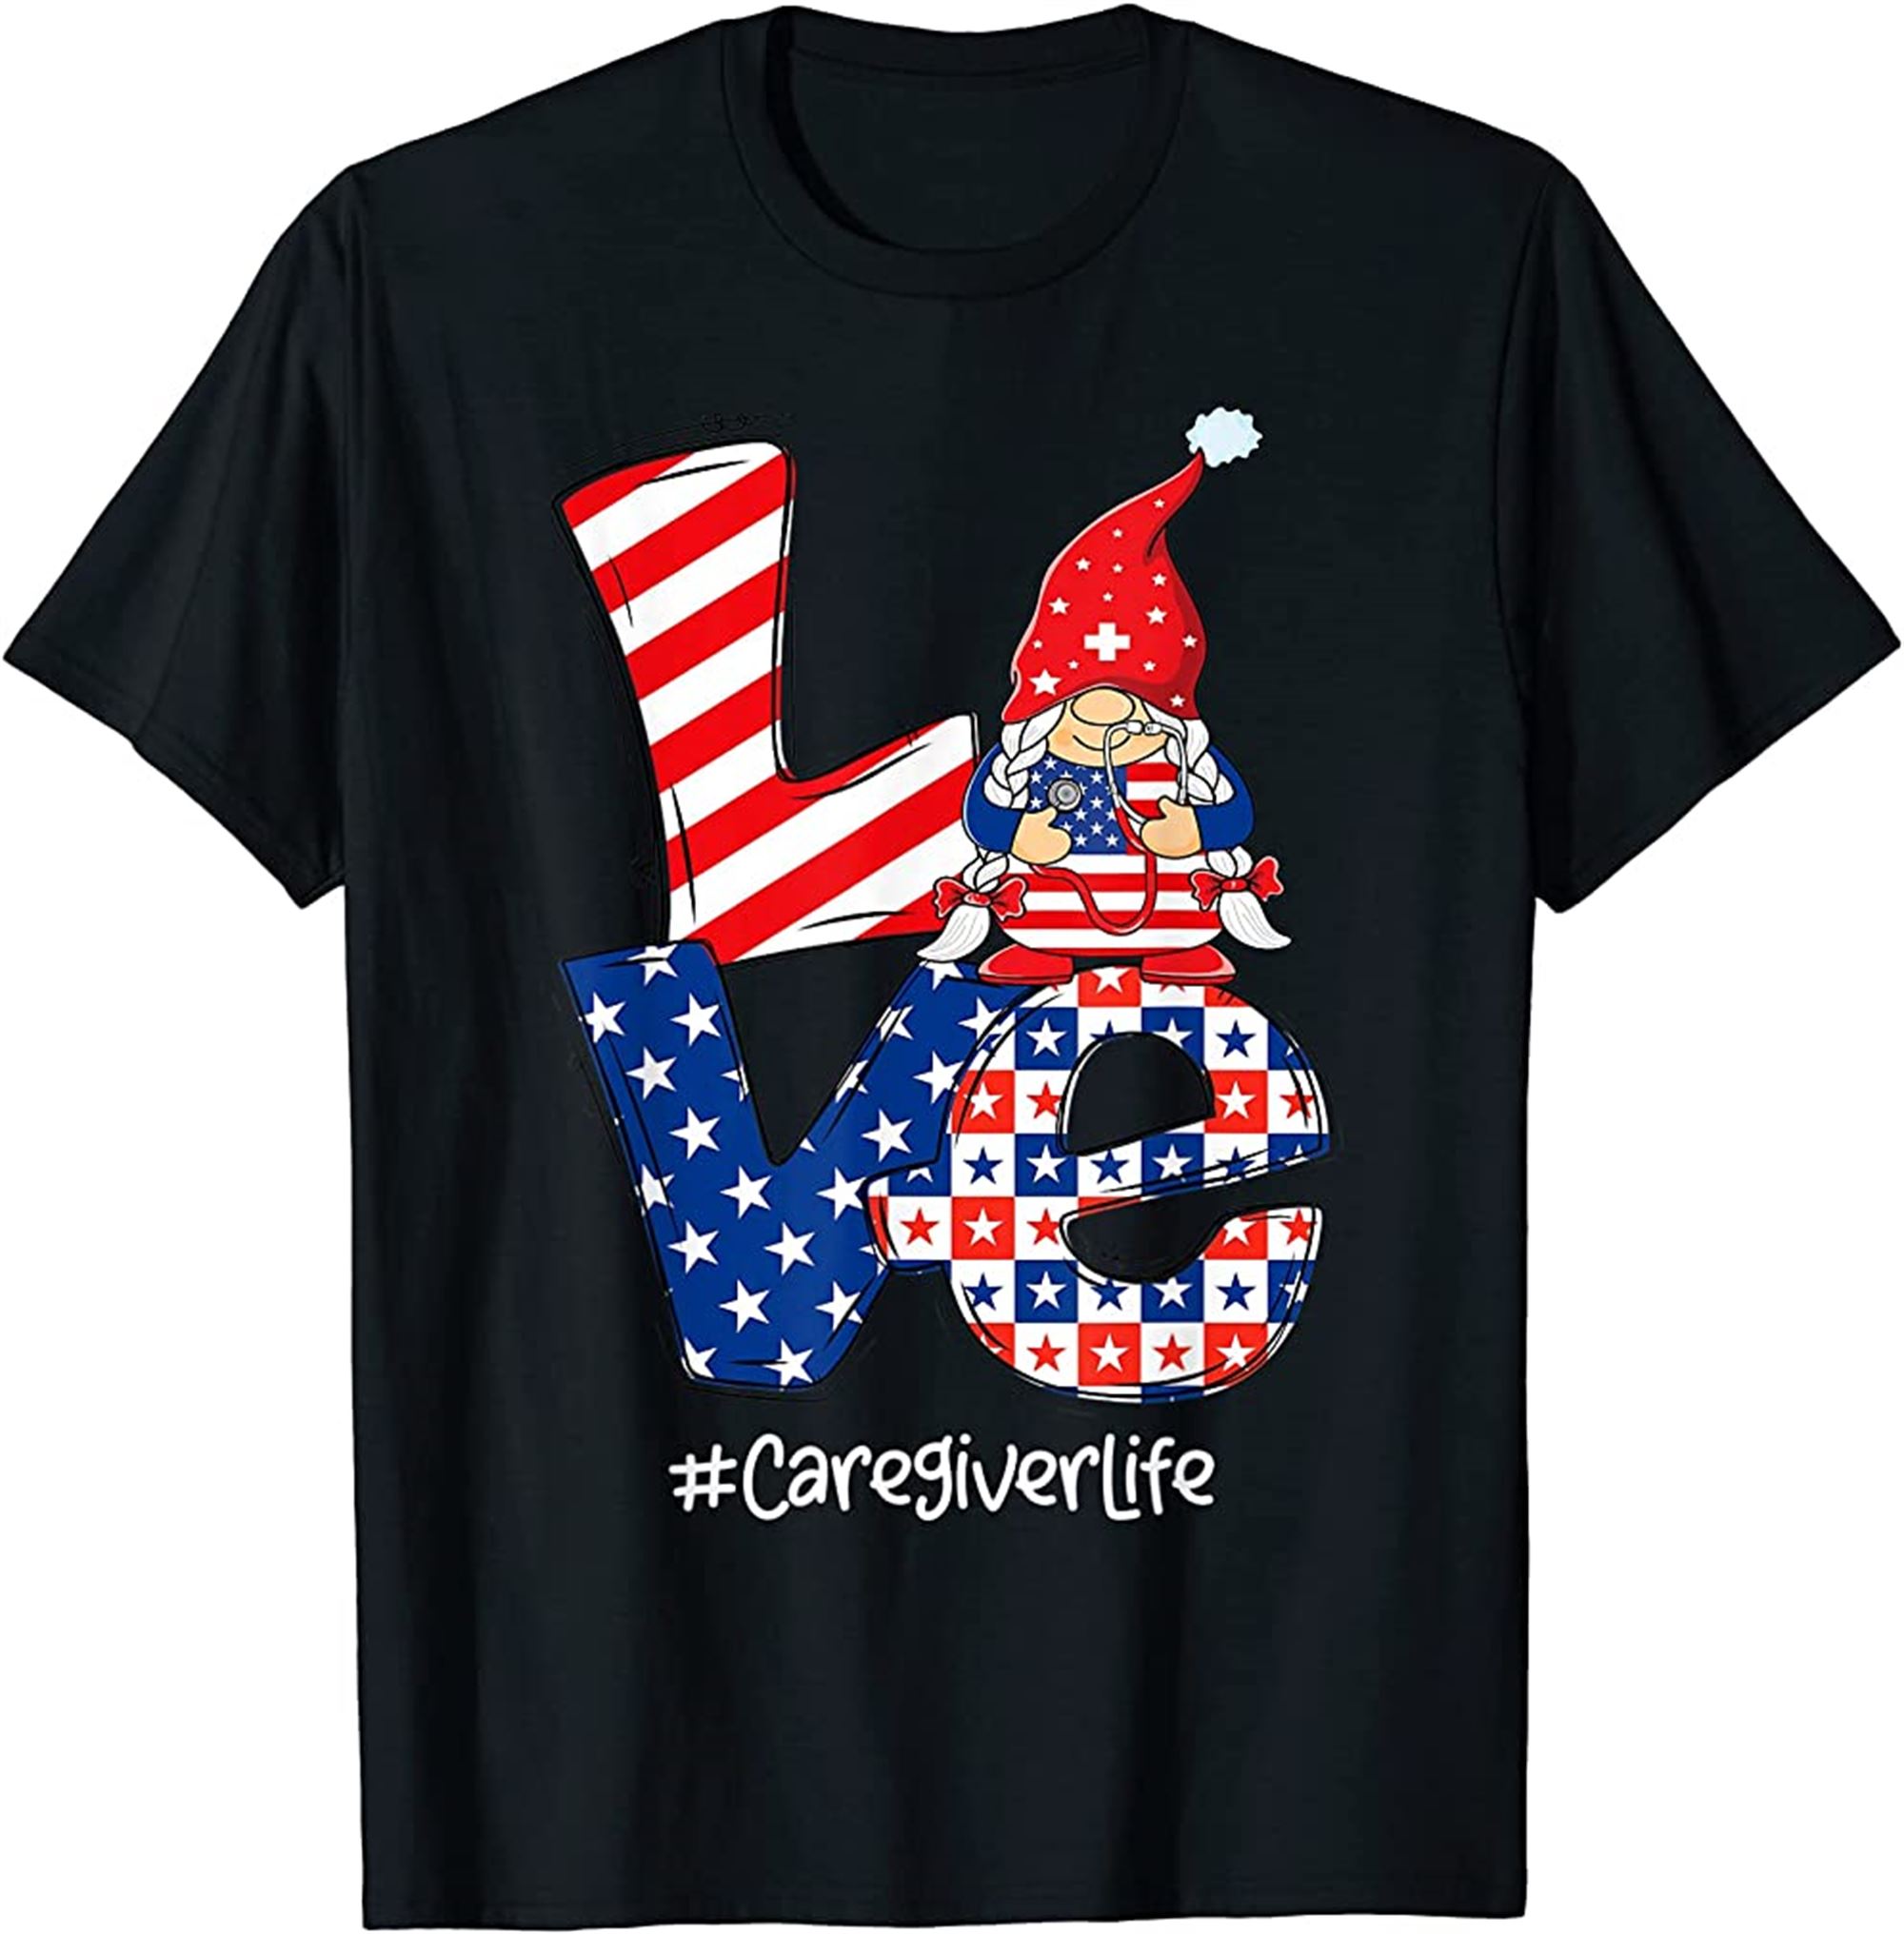 Love Caregiver Life Nurse Stethoscope Patriotic 4th Of July T-shirt Plus Size Up To 5xl